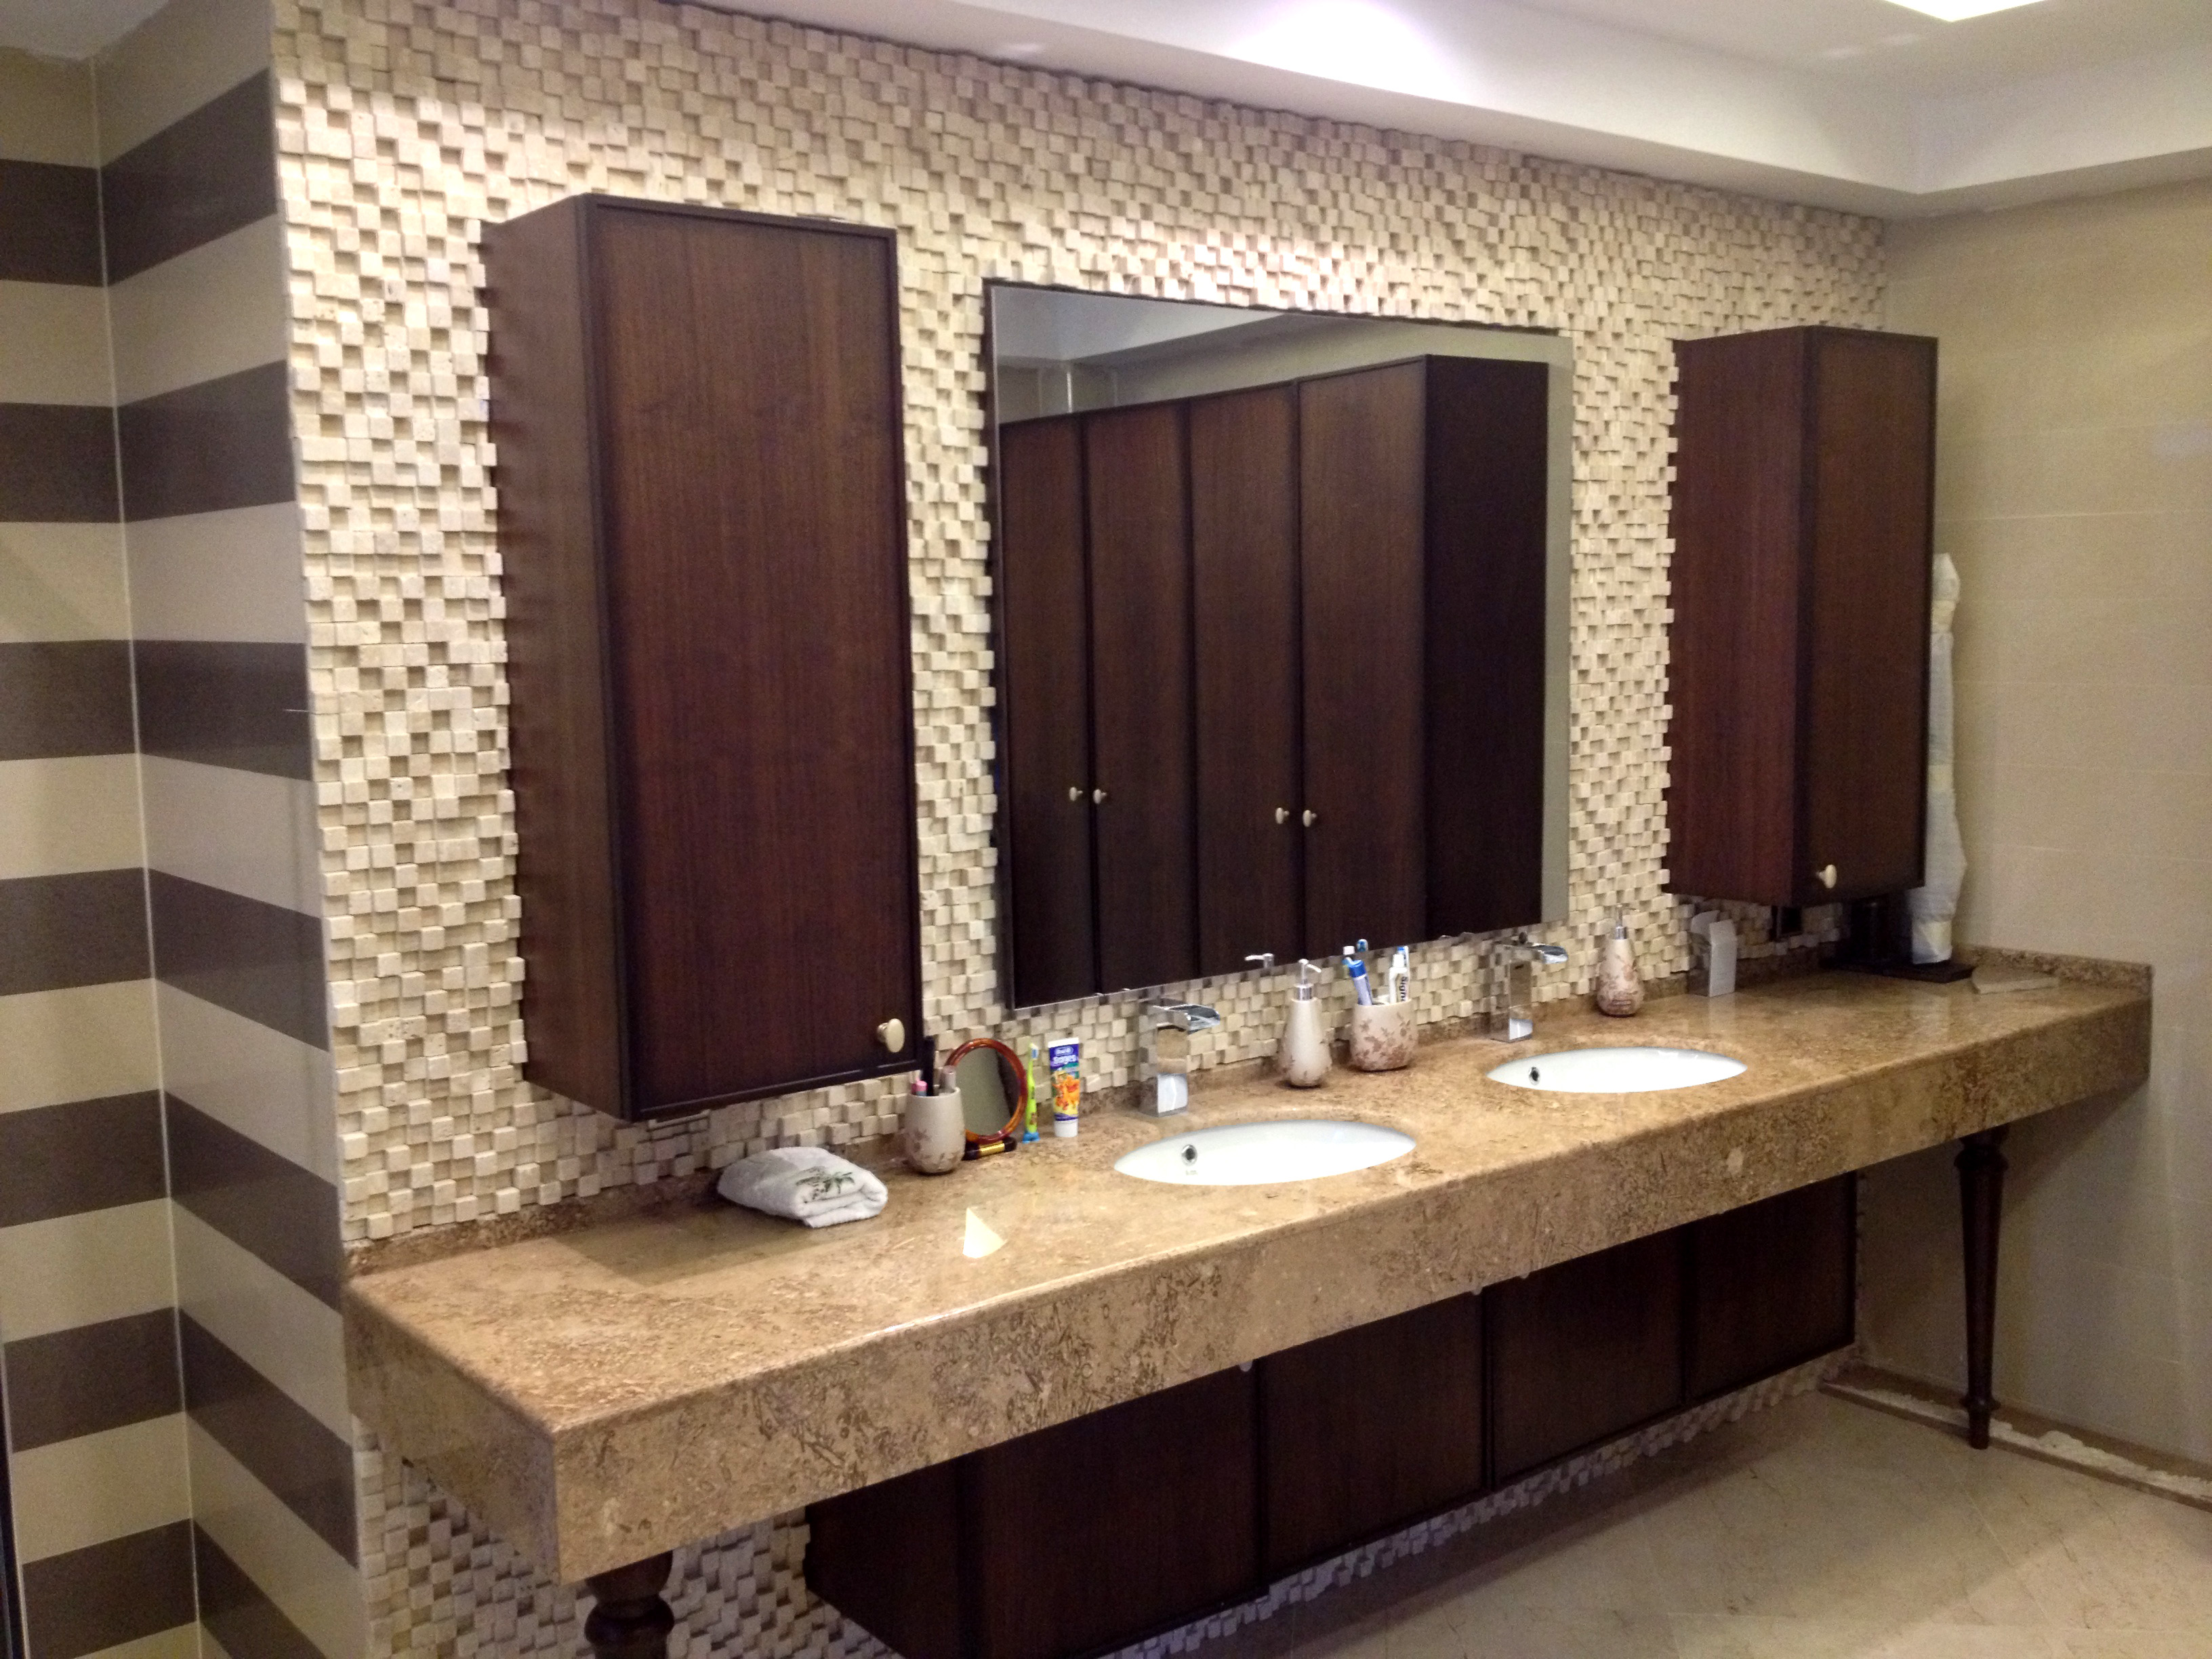 Mosaic Tile surfaces are very practical and decorative